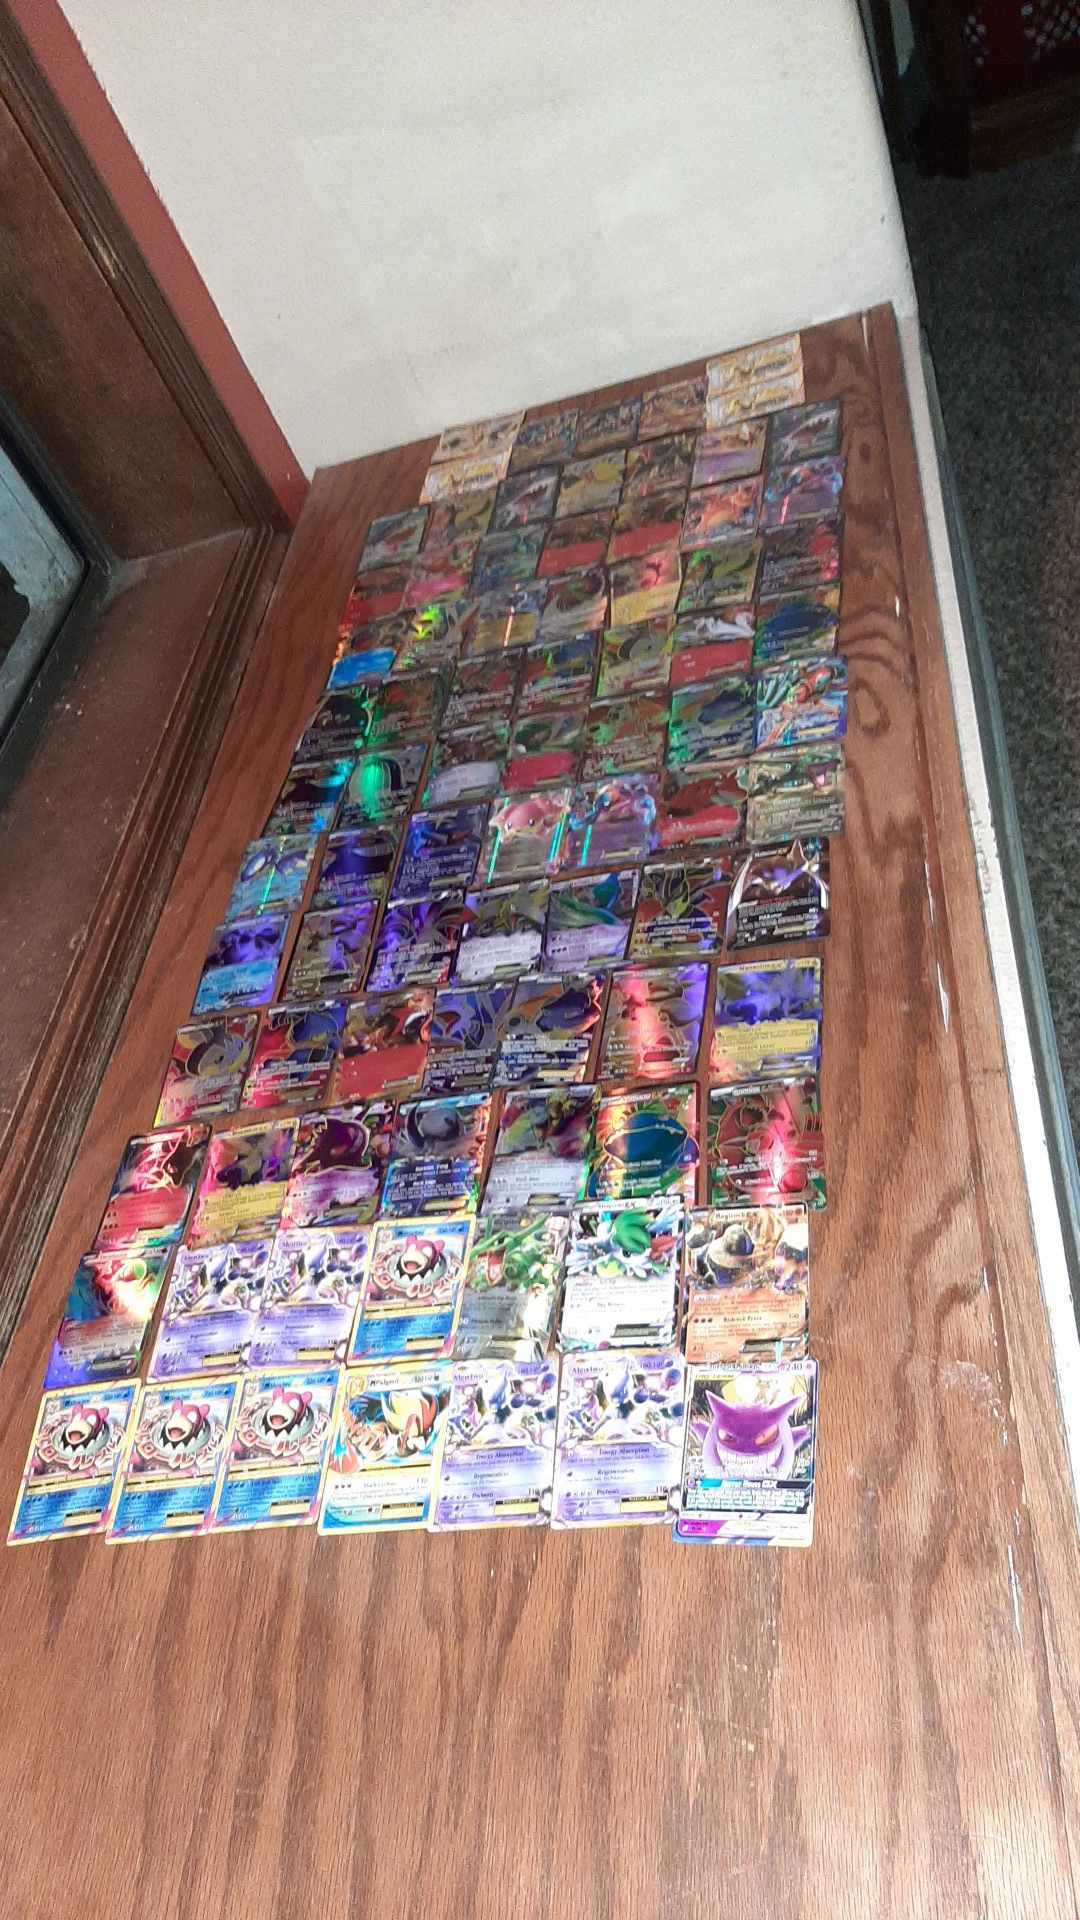 85 pokemon cards just ex's and gx's